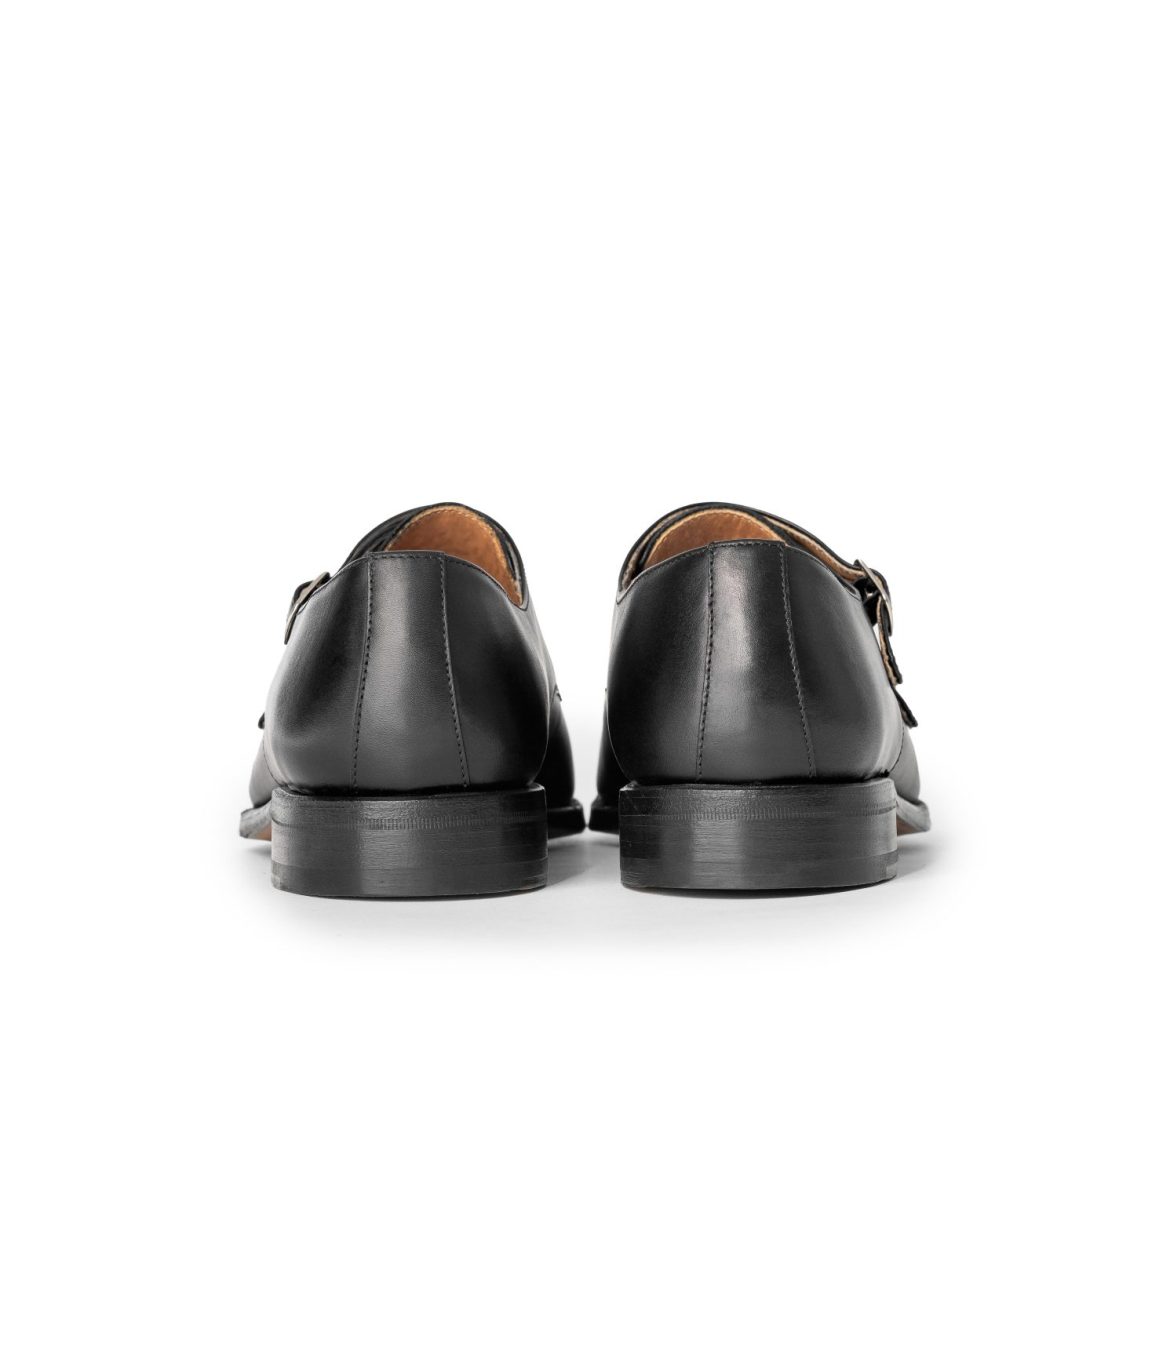 BERWICK 5212 Double Monk Chateaubriand Negro - The Refinement